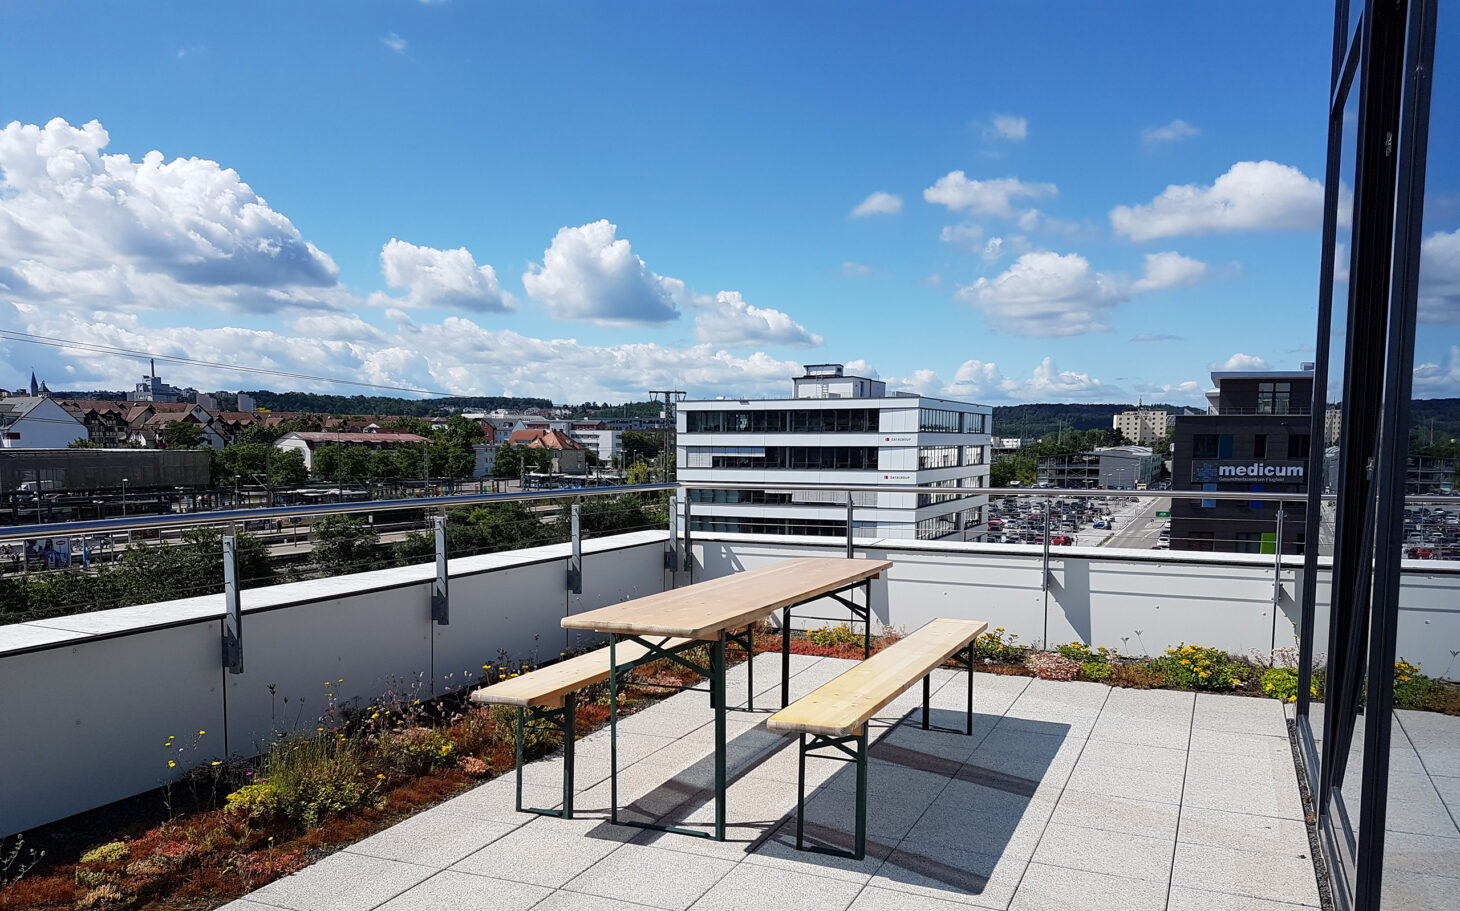 valantic Supply Chain Excellence office in Böblingen, image of the roof terrace